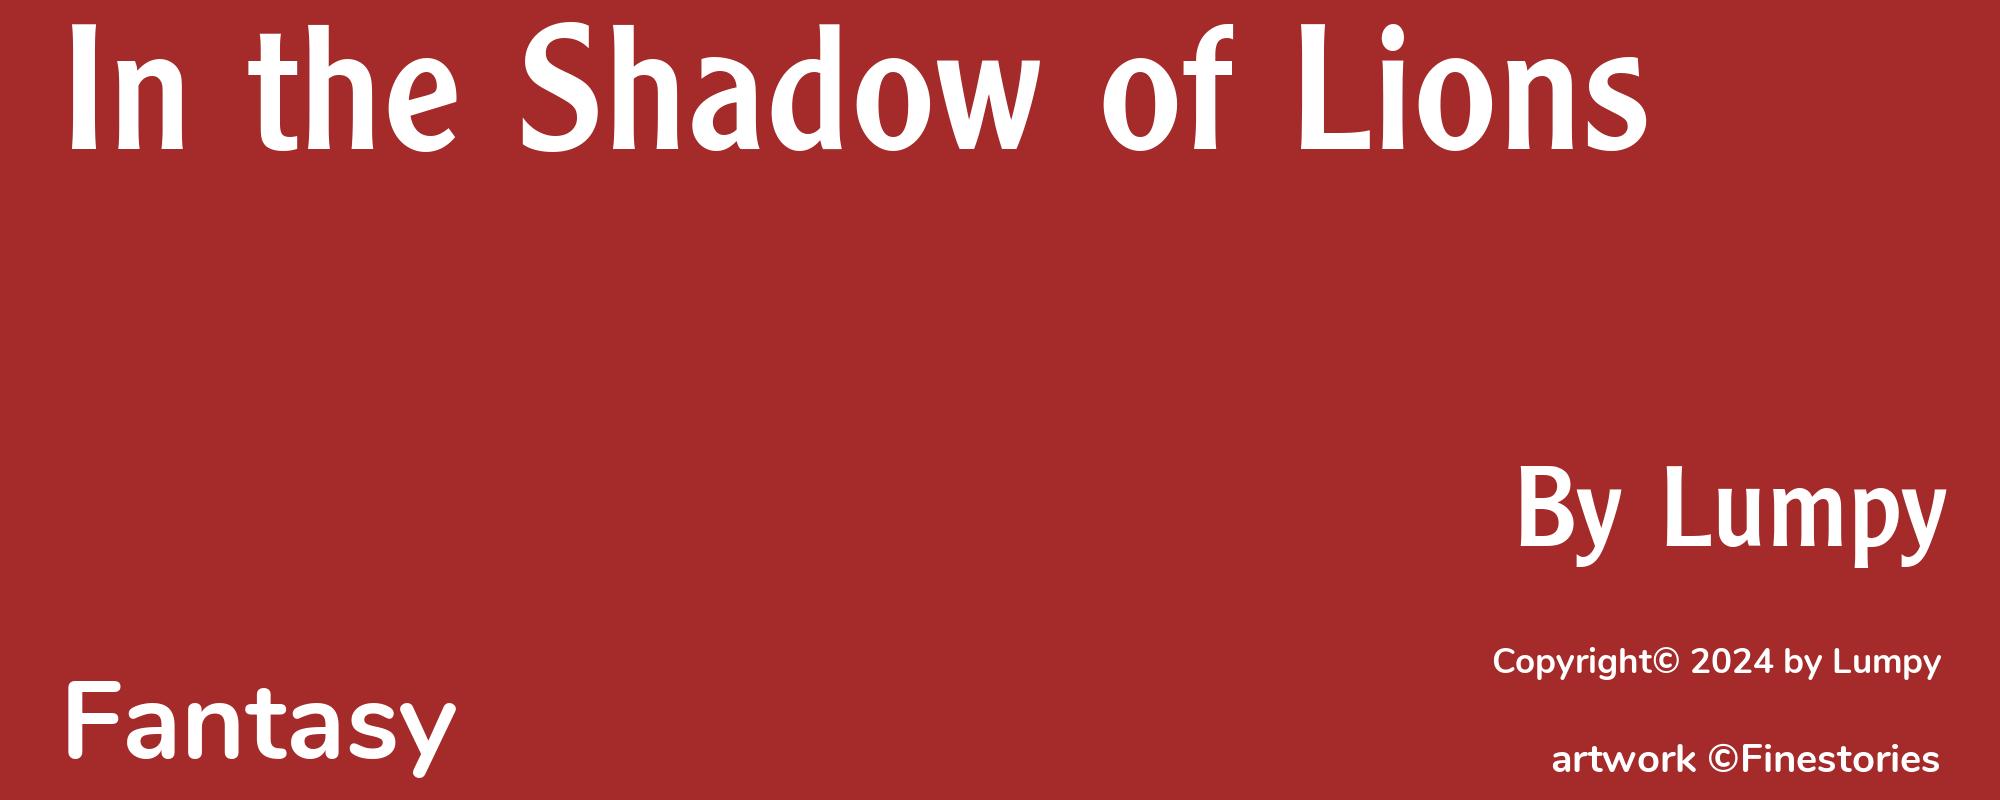 In the Shadow of Lions - Cover